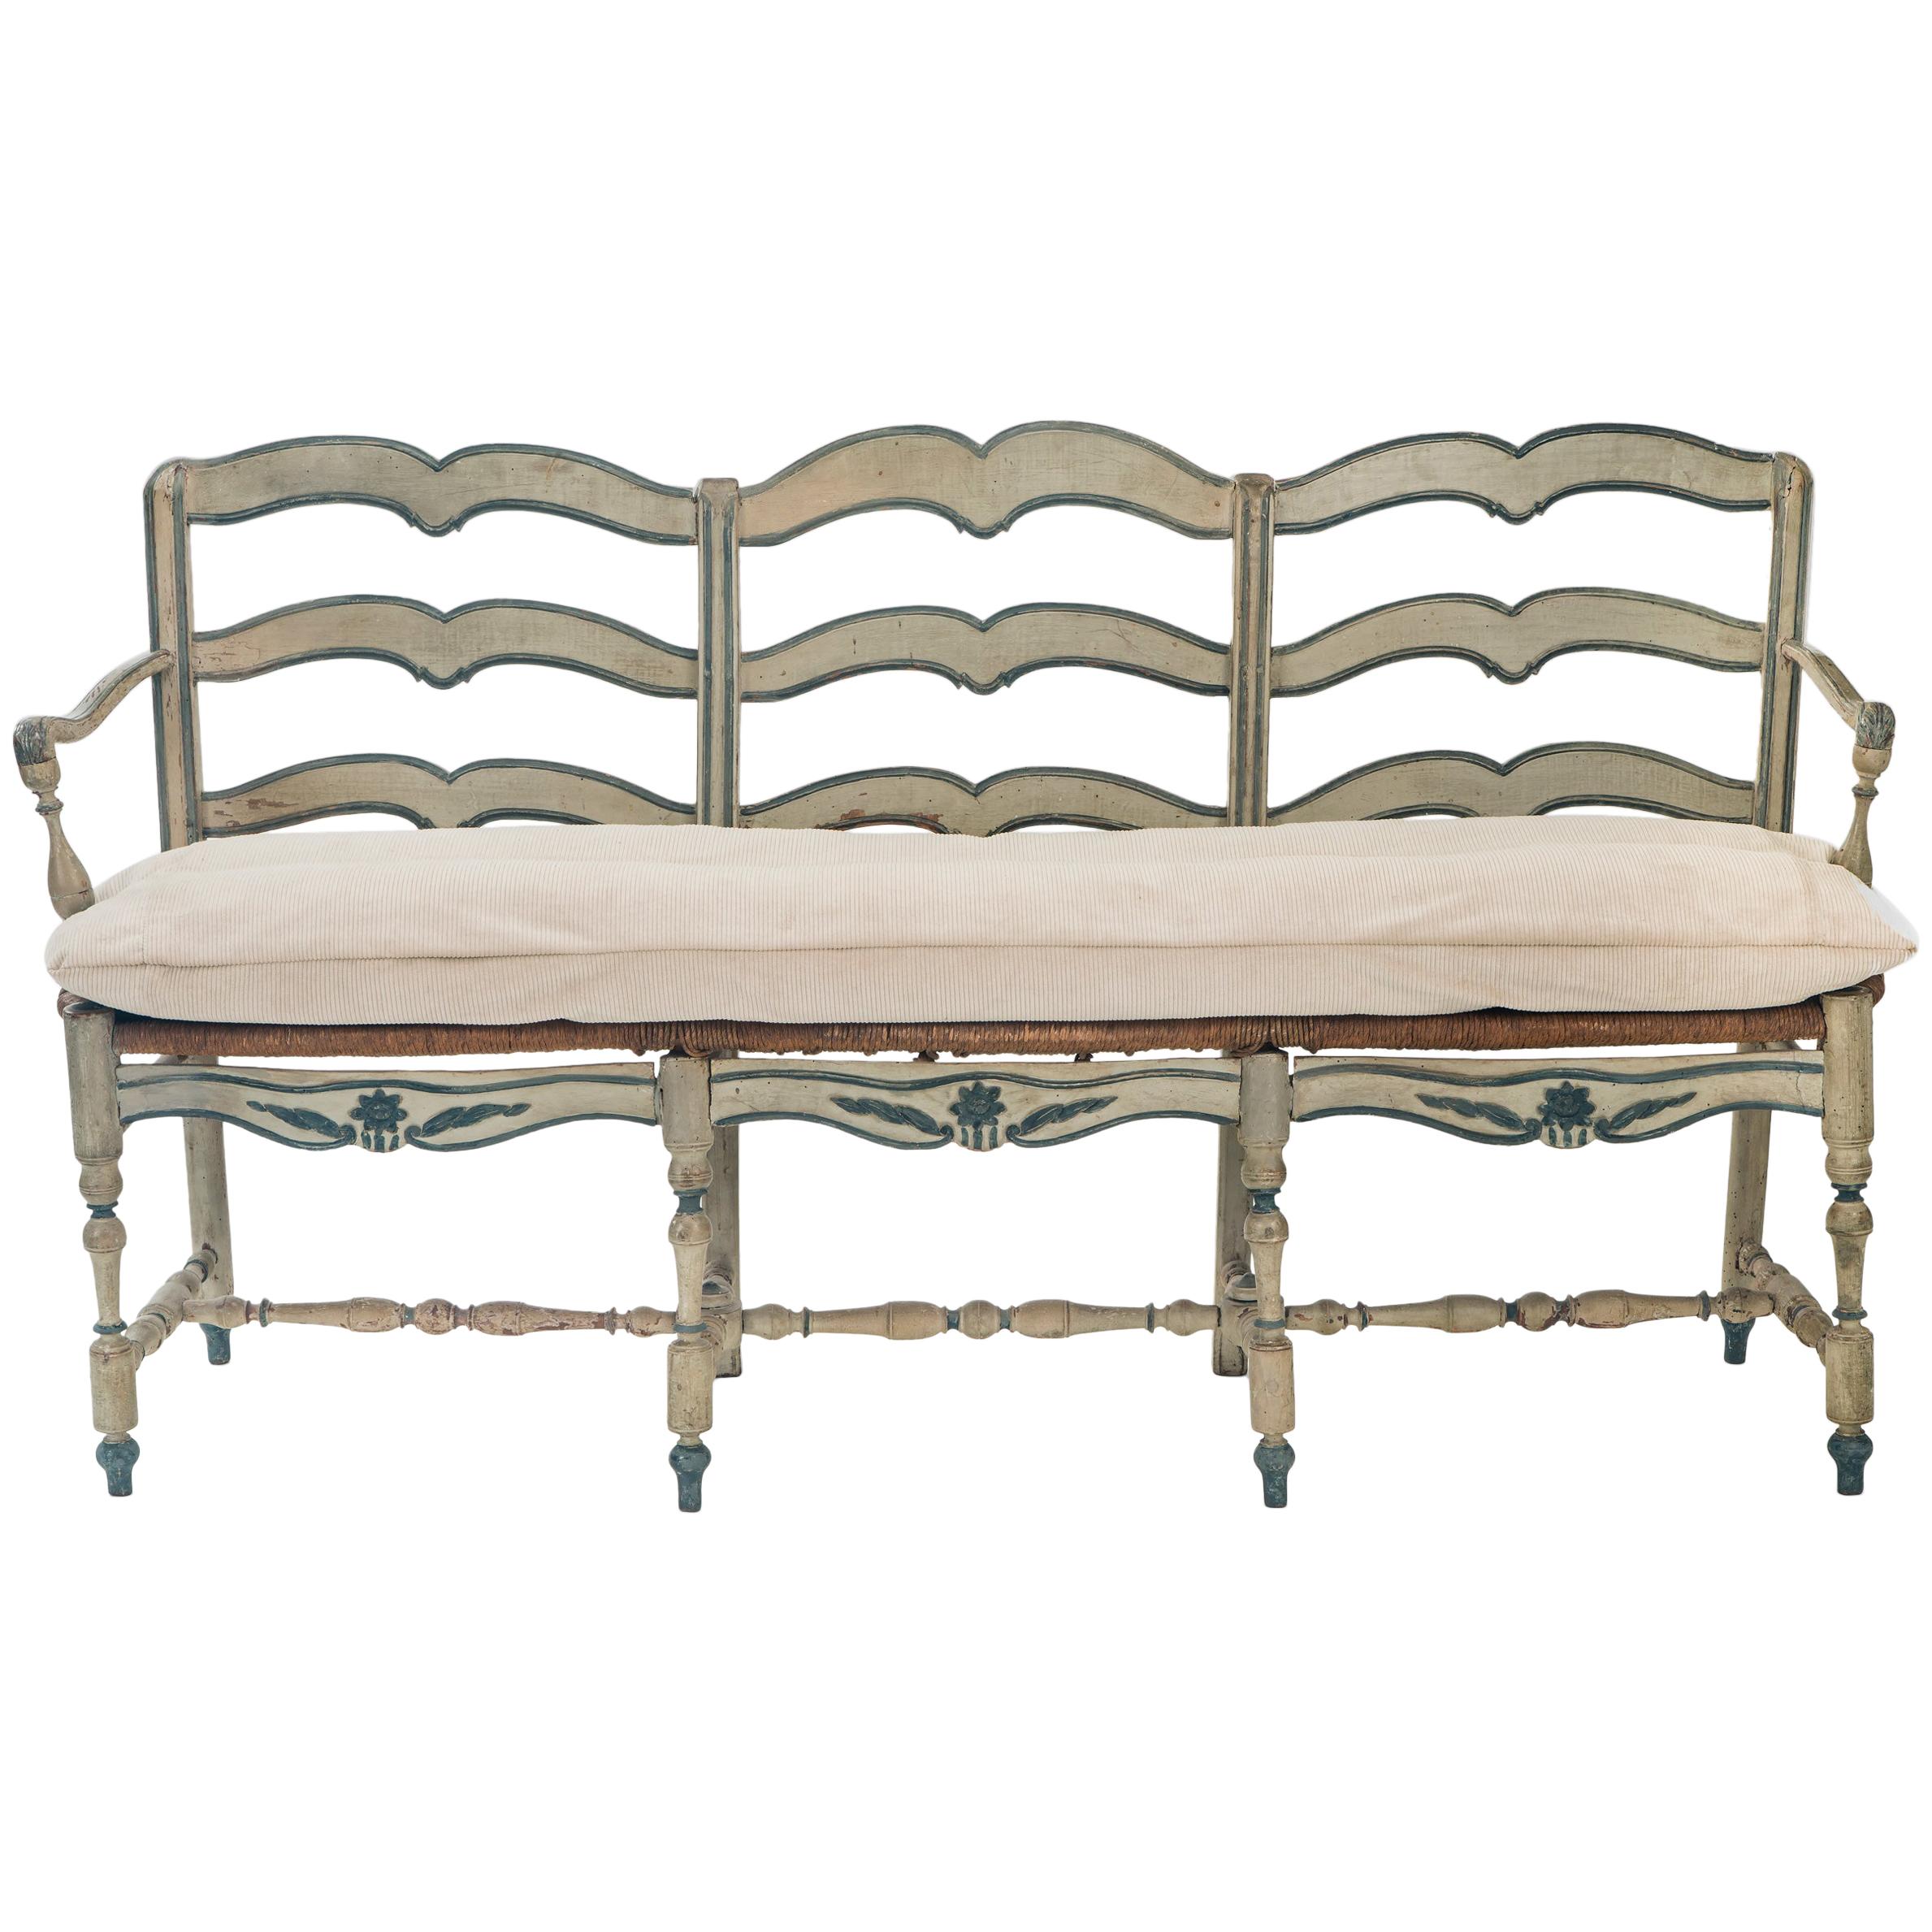 French Provincial Painted Sofa or Bench For Sale